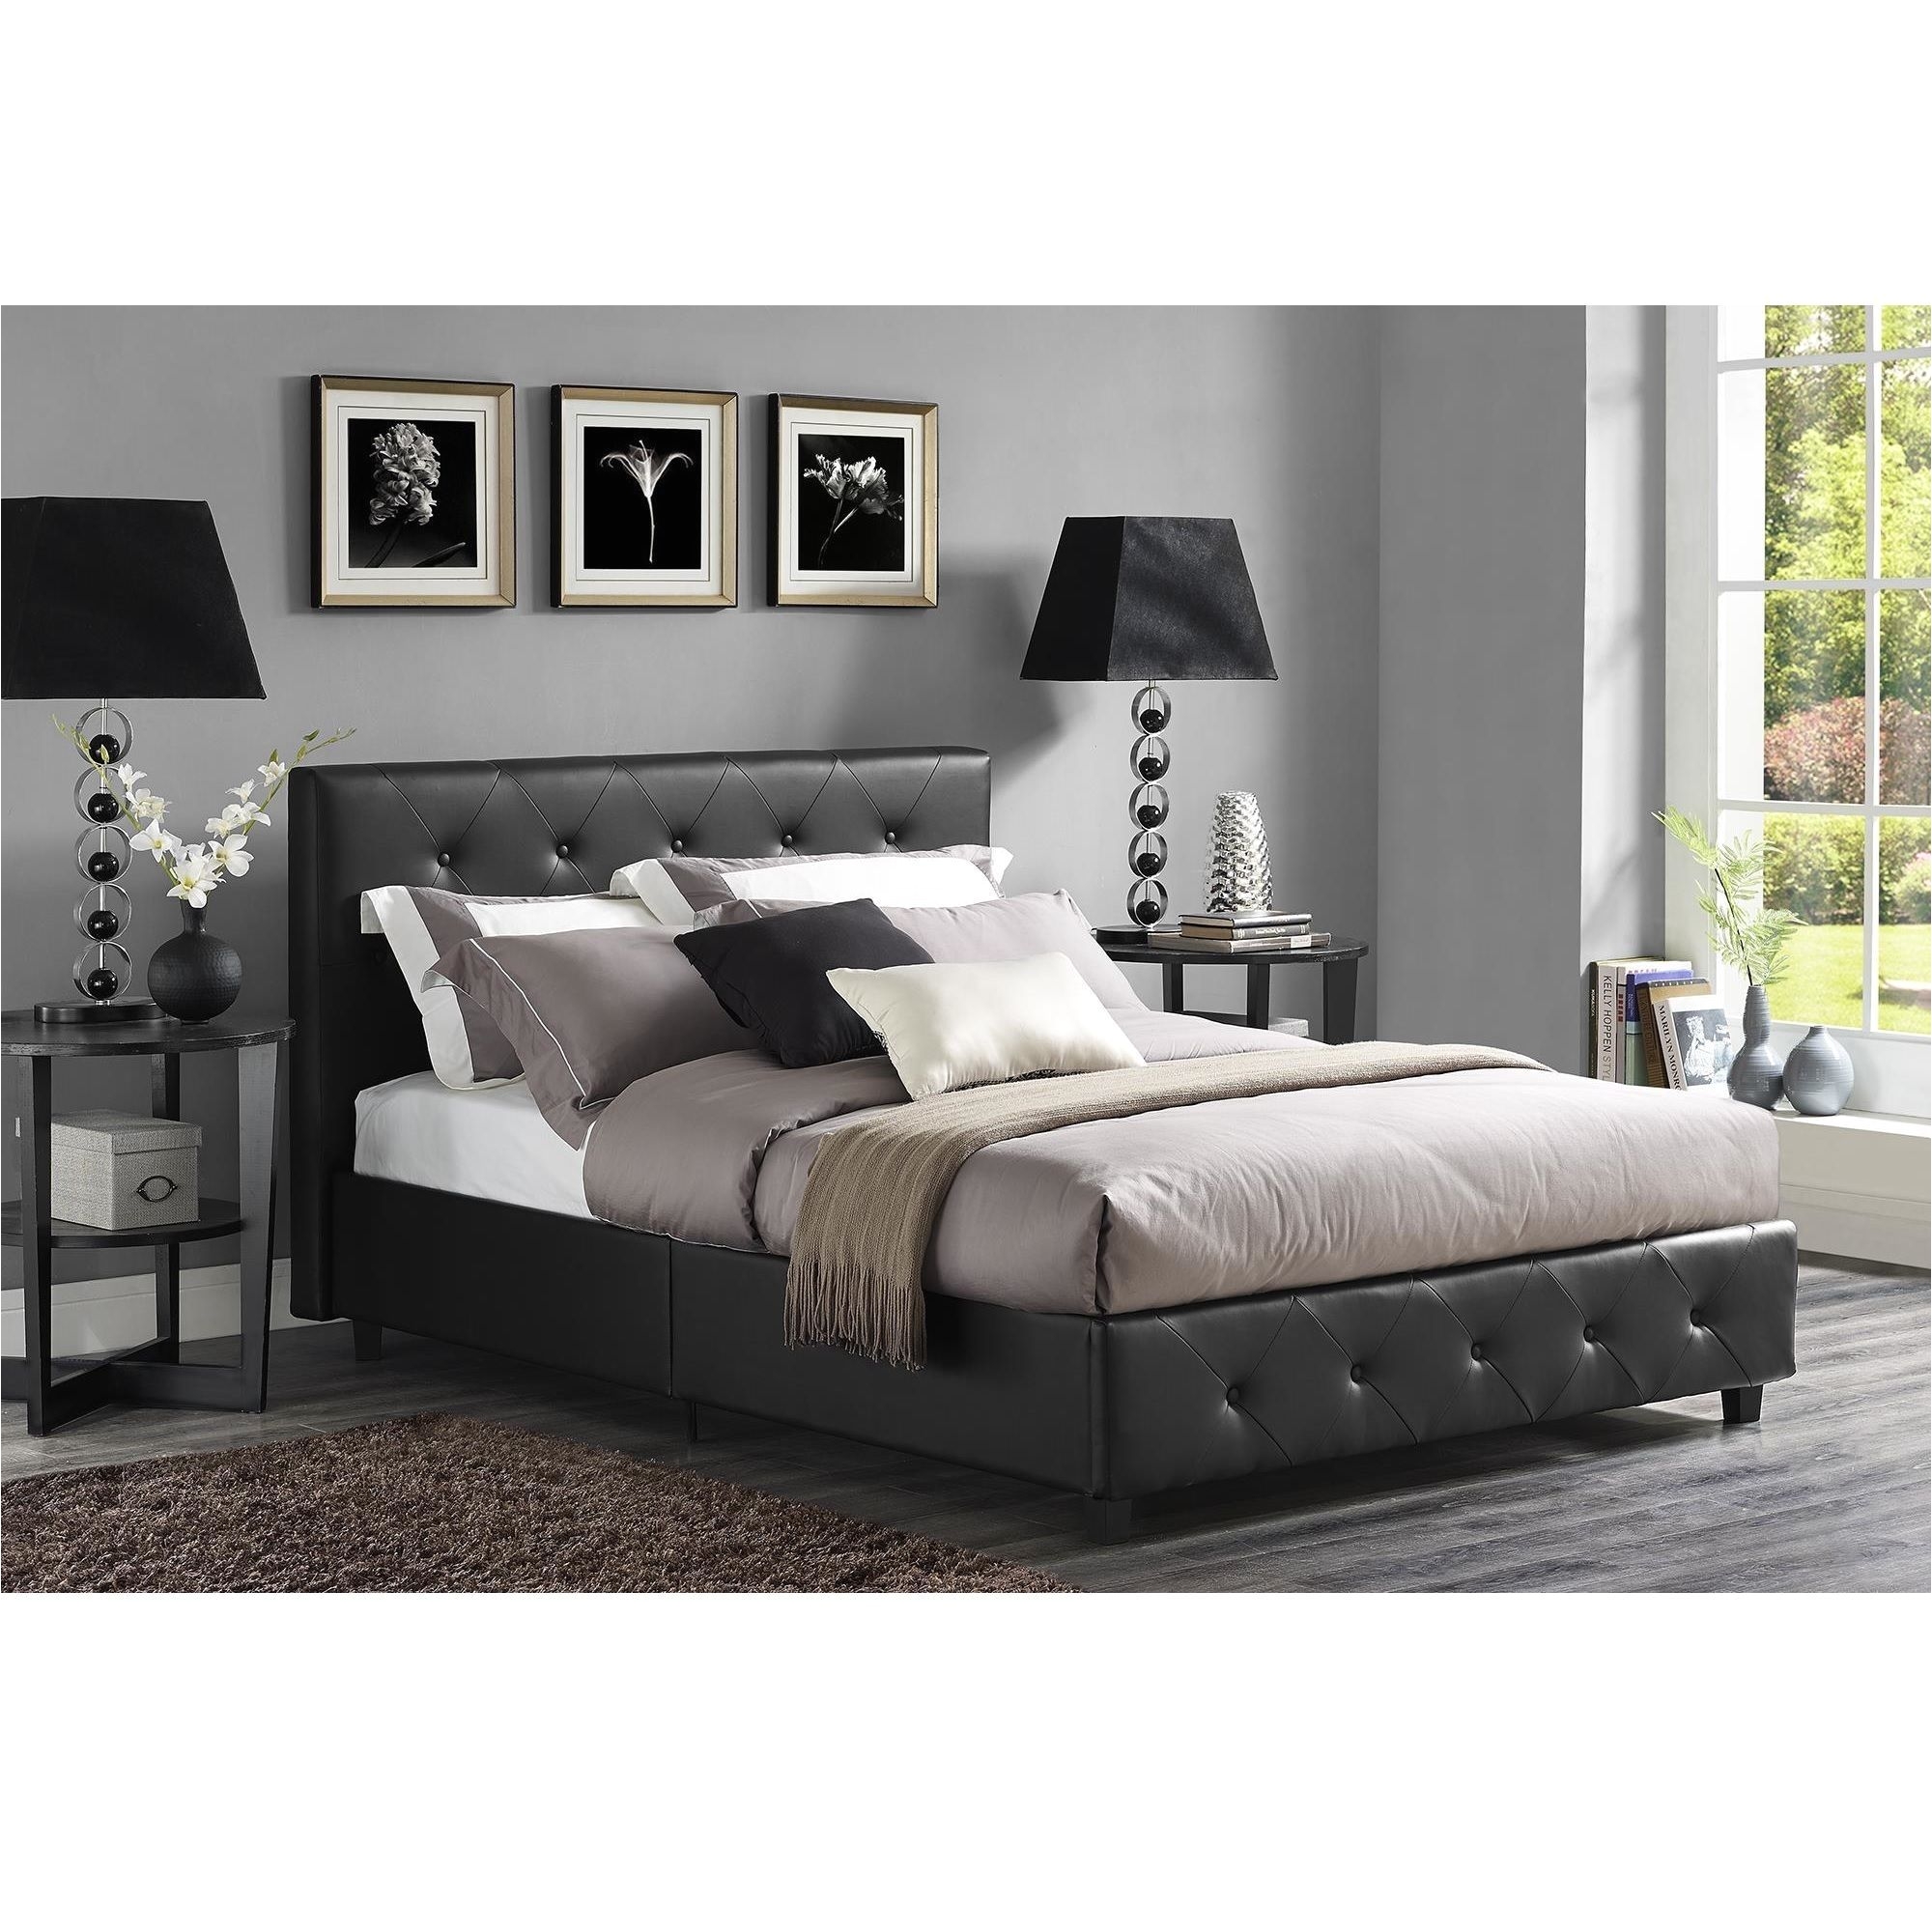 elevate the style of your bedroom with this dhp dakota black bed the faux